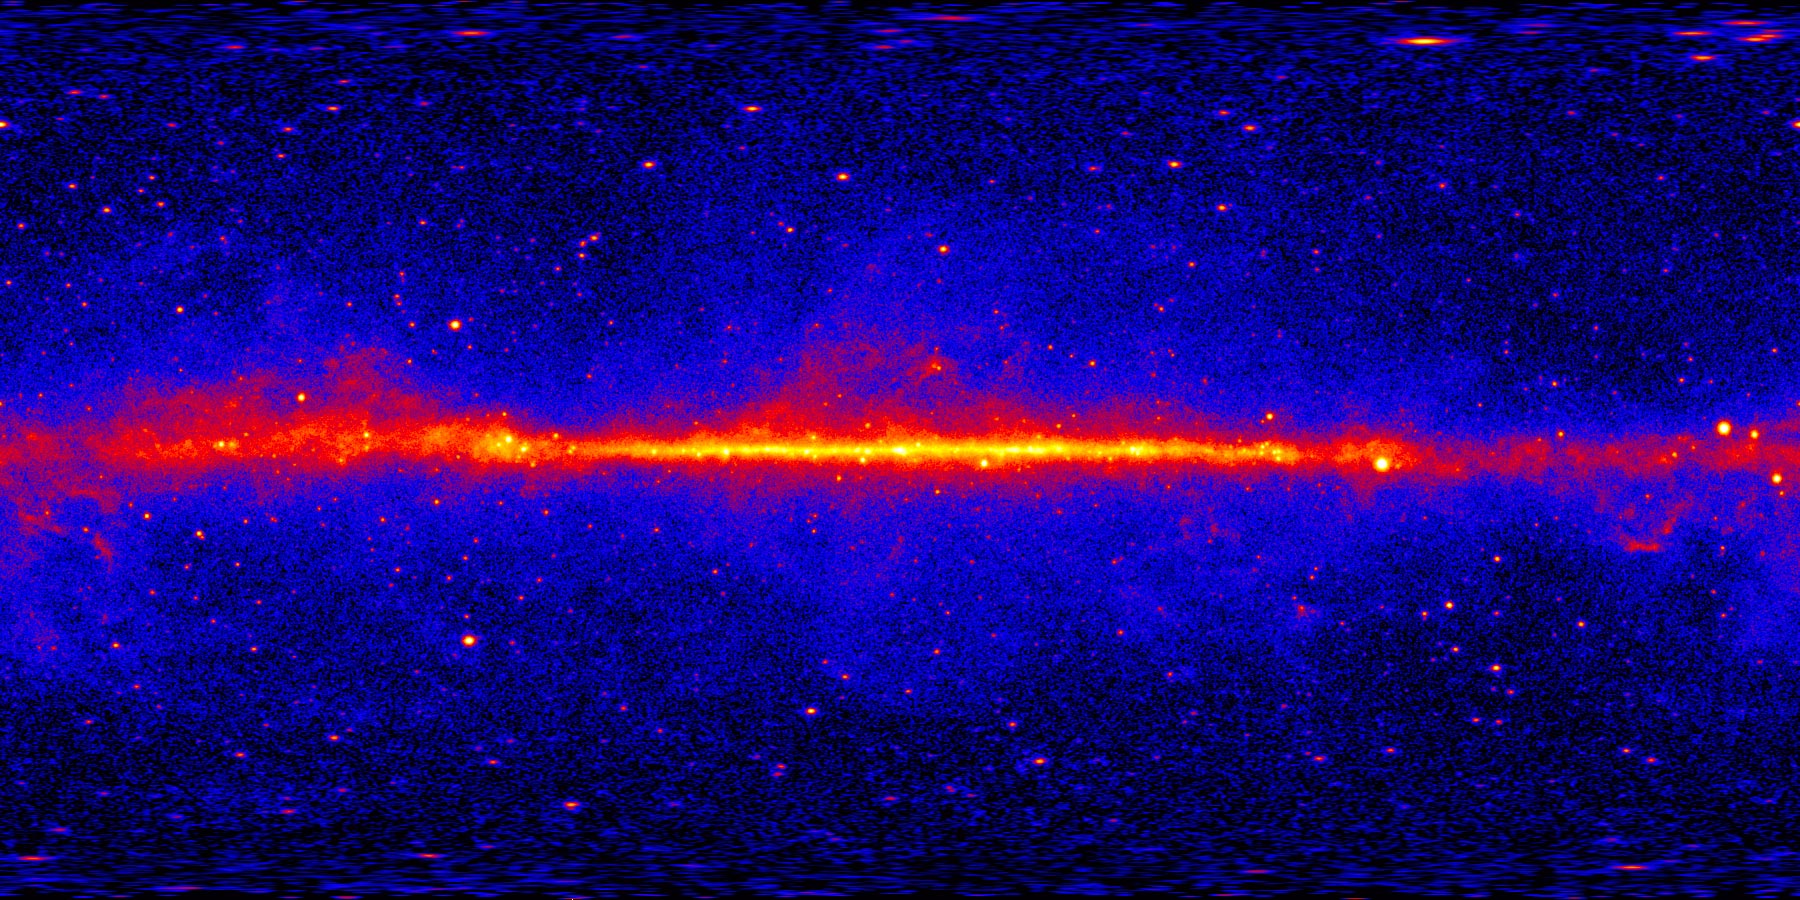 Gamma ray photo of the Milky Way. The image is pixelated and in red, yellow, and blue.